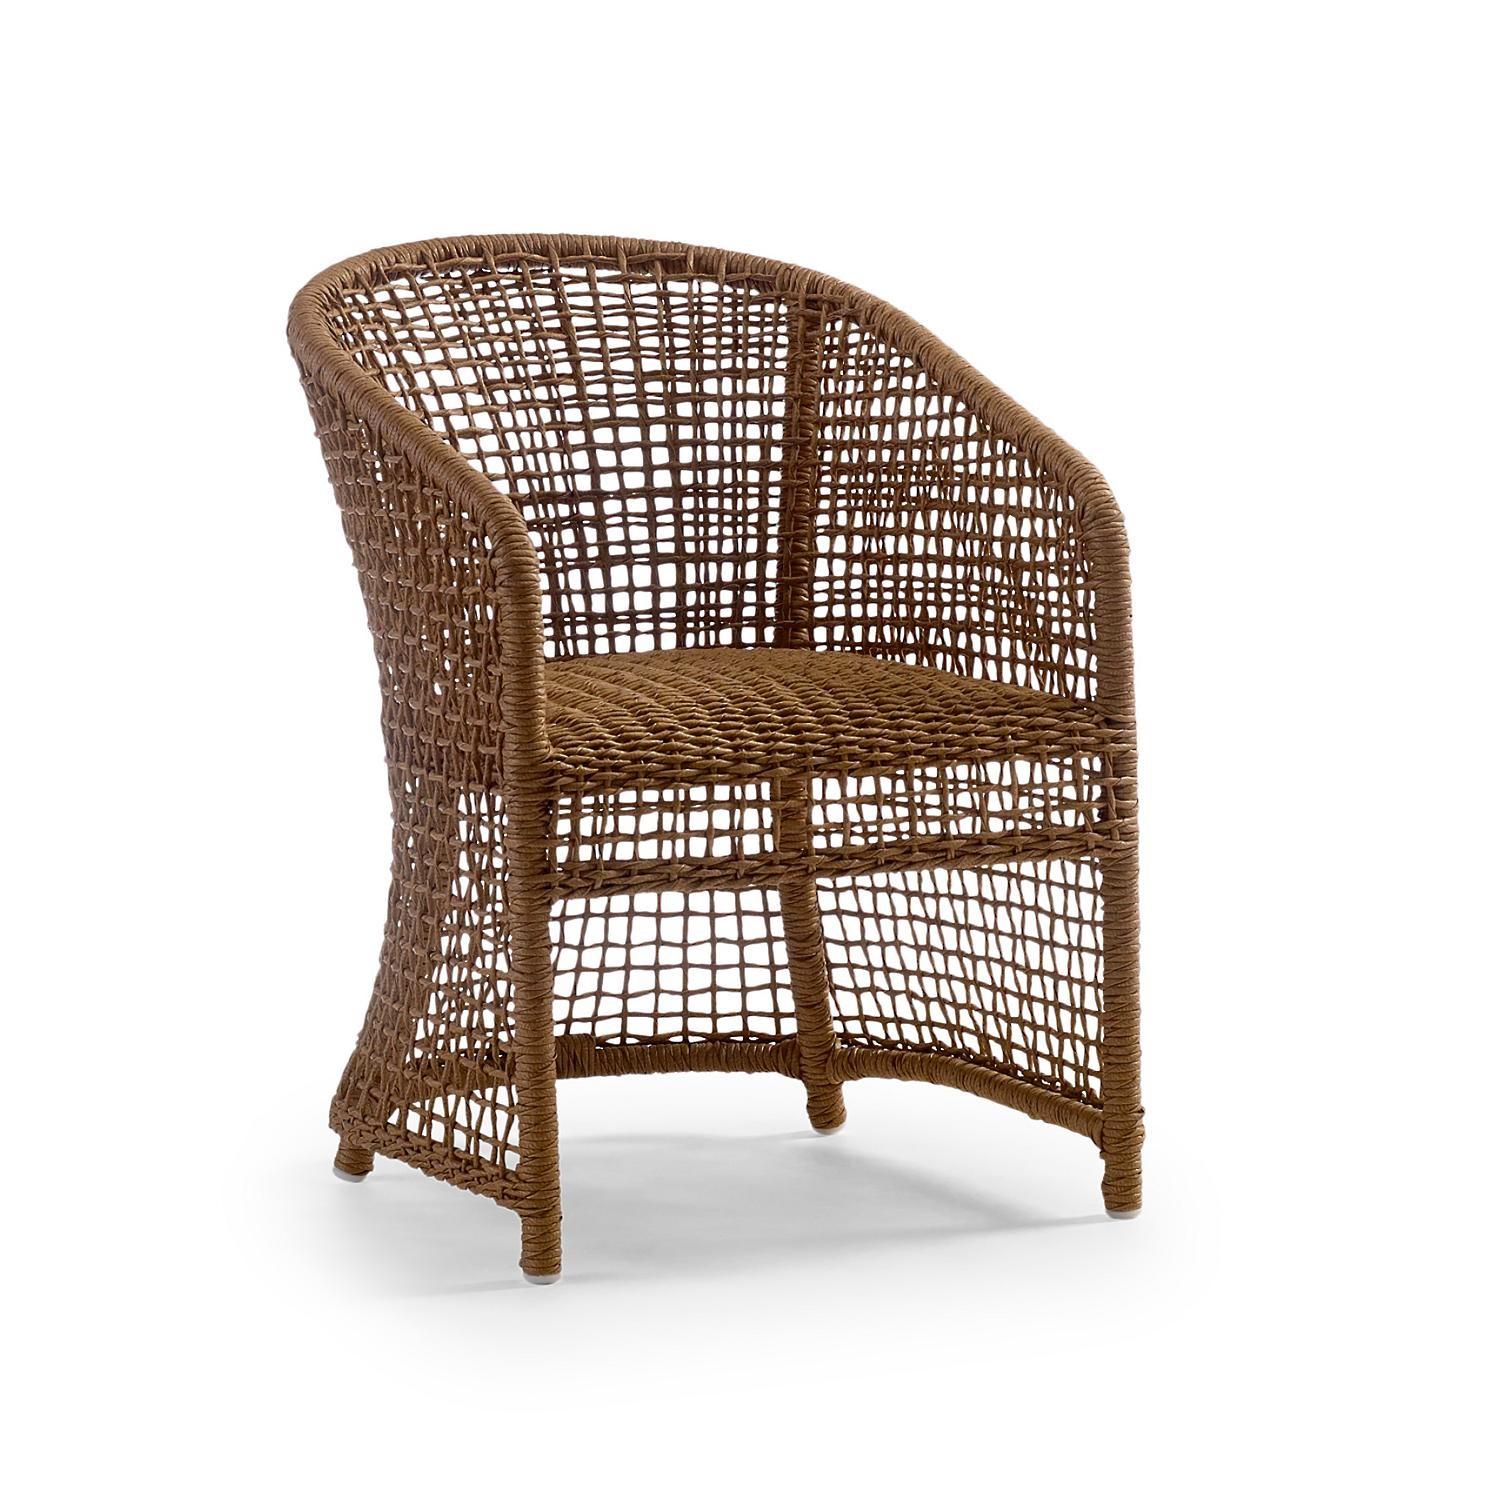 A transitional outdoor dining collection composed of 4 dining chairs and one dining table. Each chair features all-weather woven resin wicker in a natural finish with a powder coated metal frame. Each upholstered component is integrated with